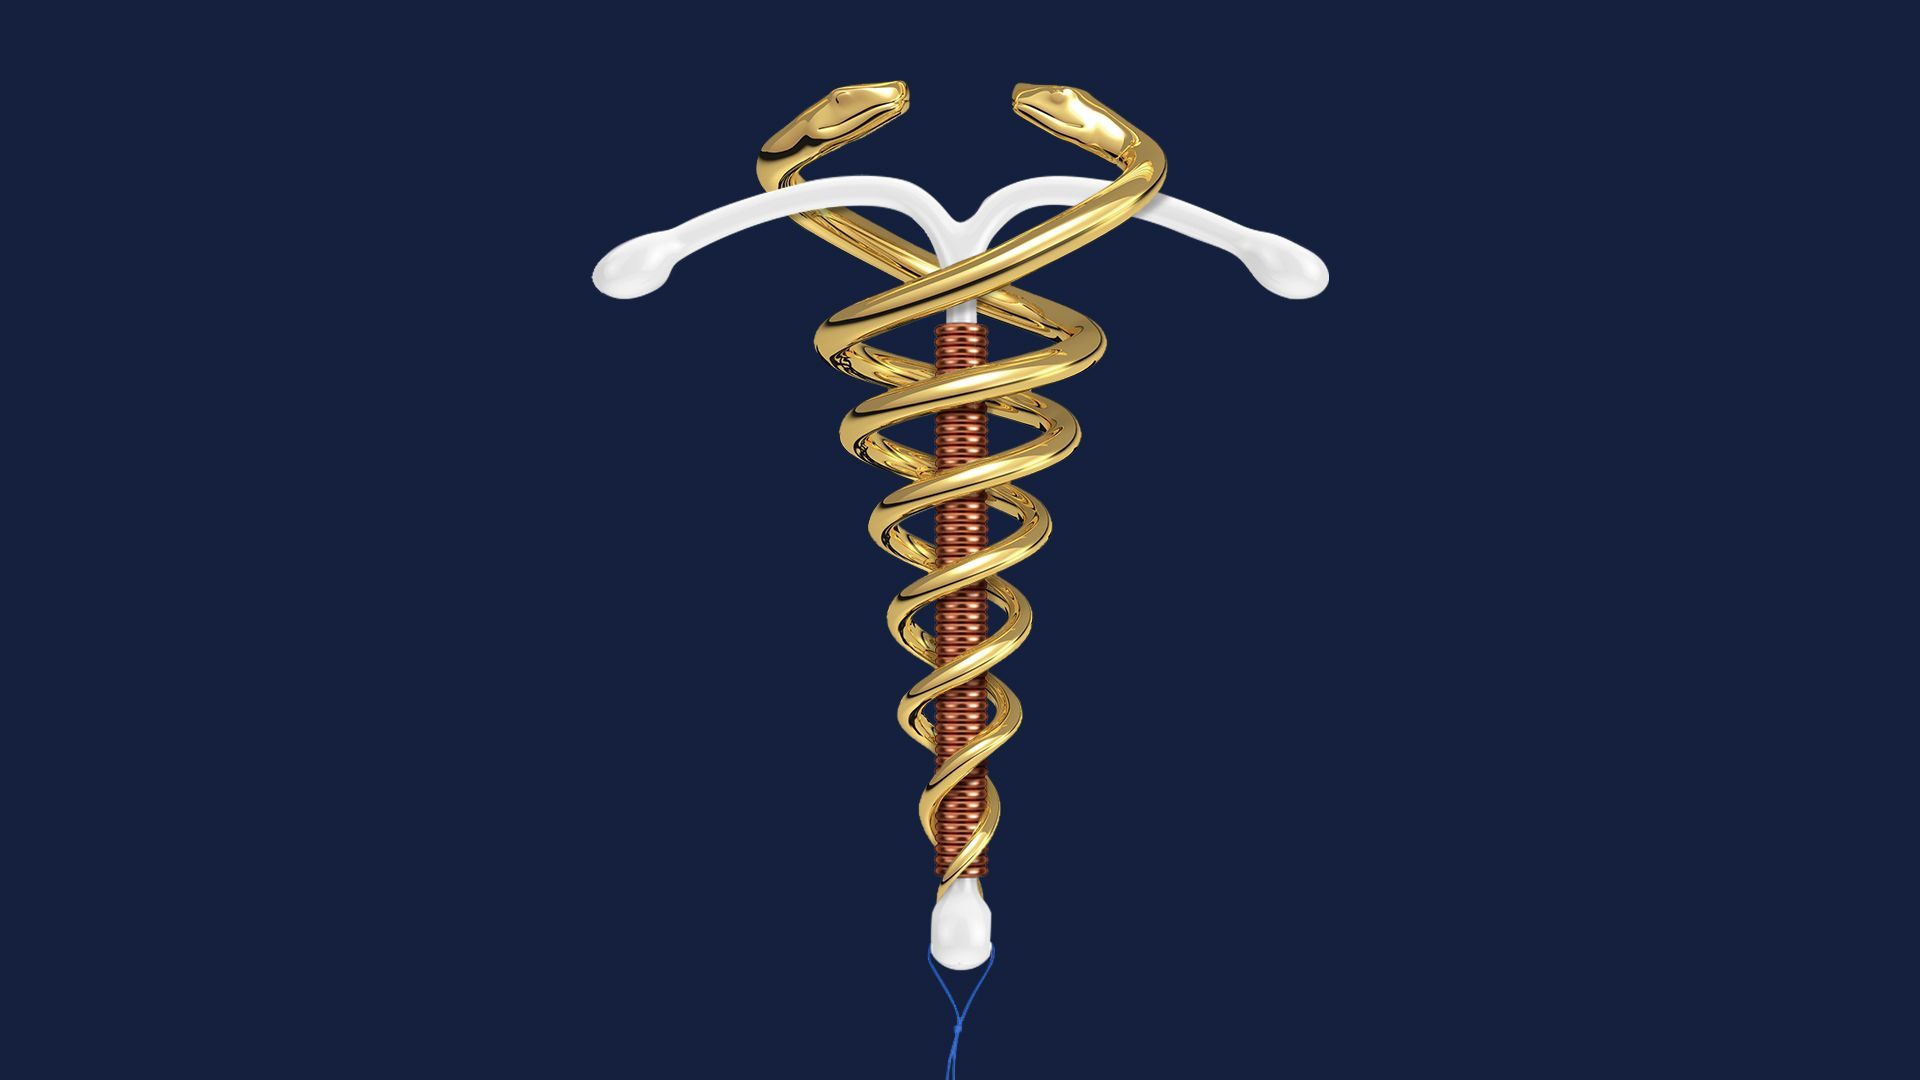 Illustration of an IUD with caduceus snakes coiled around it